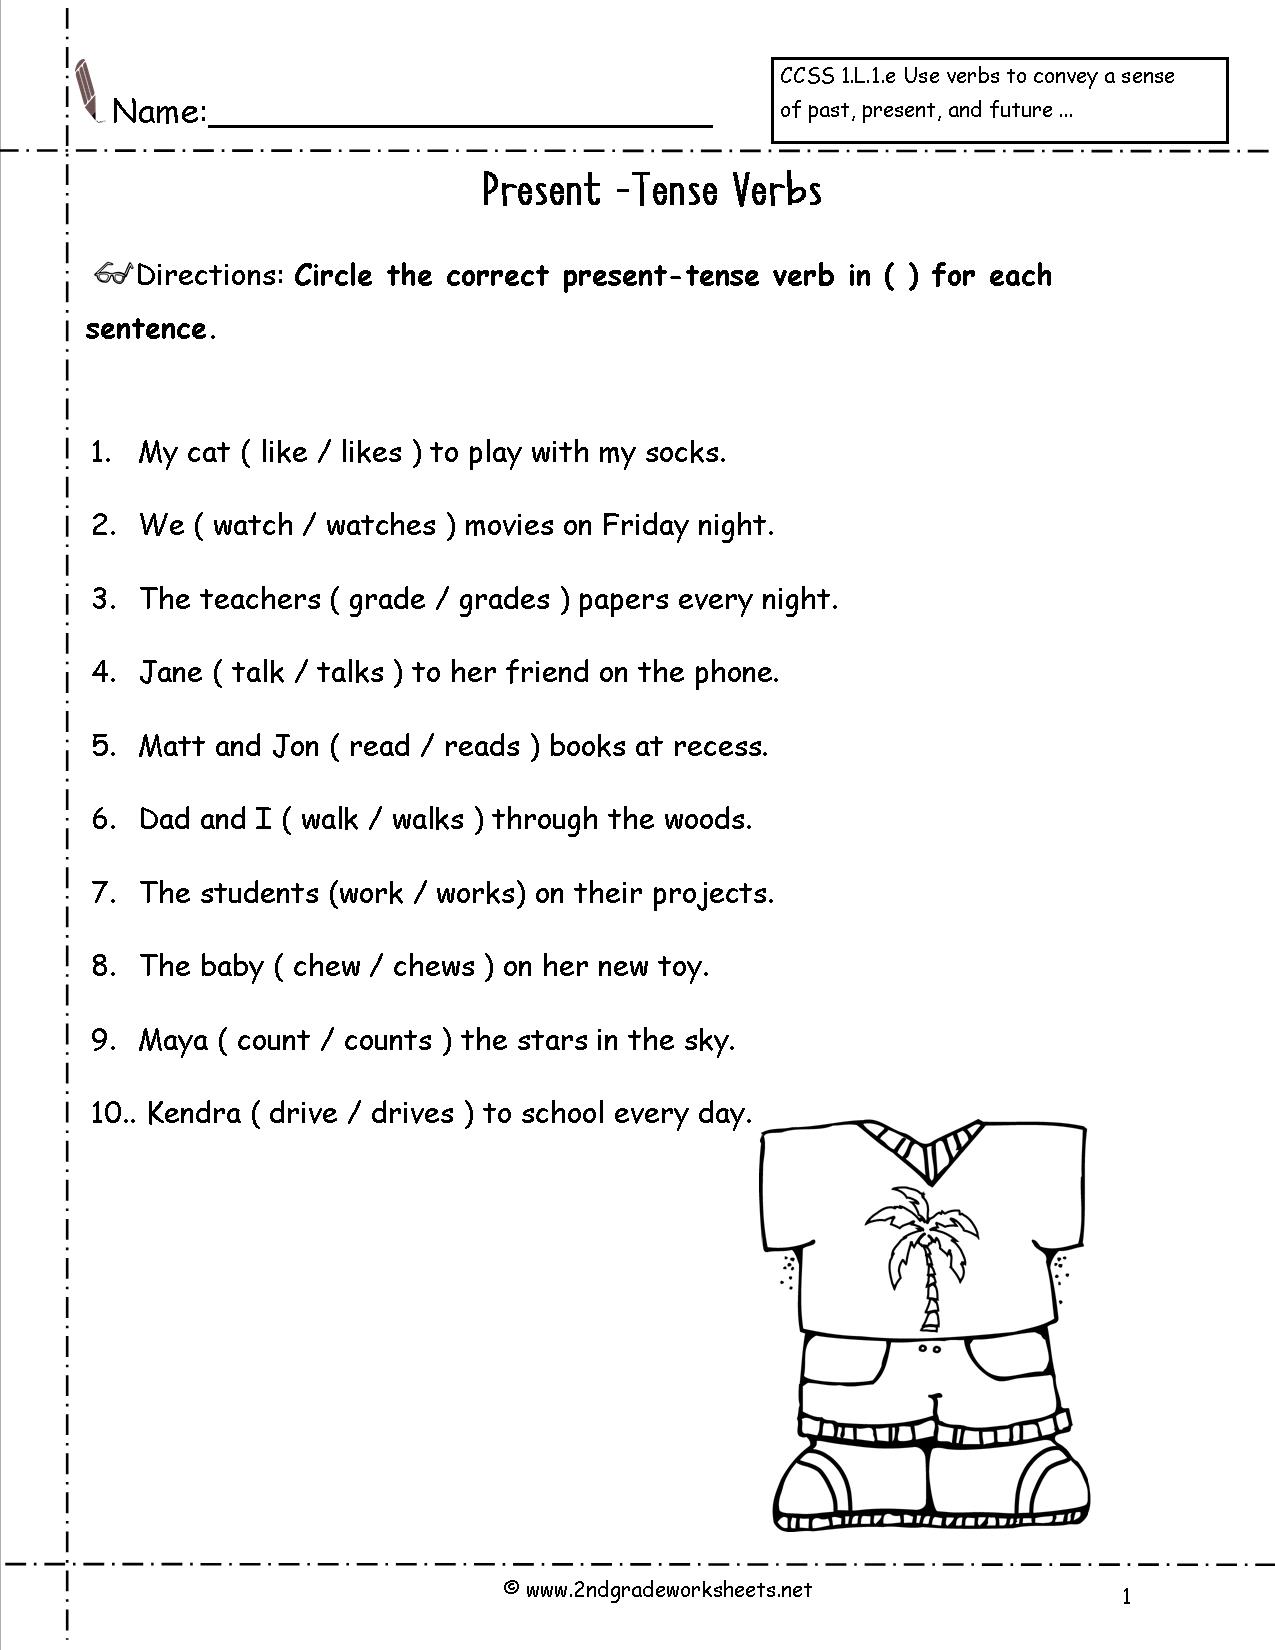 Present Tense Verbs Worksheets For First Grade